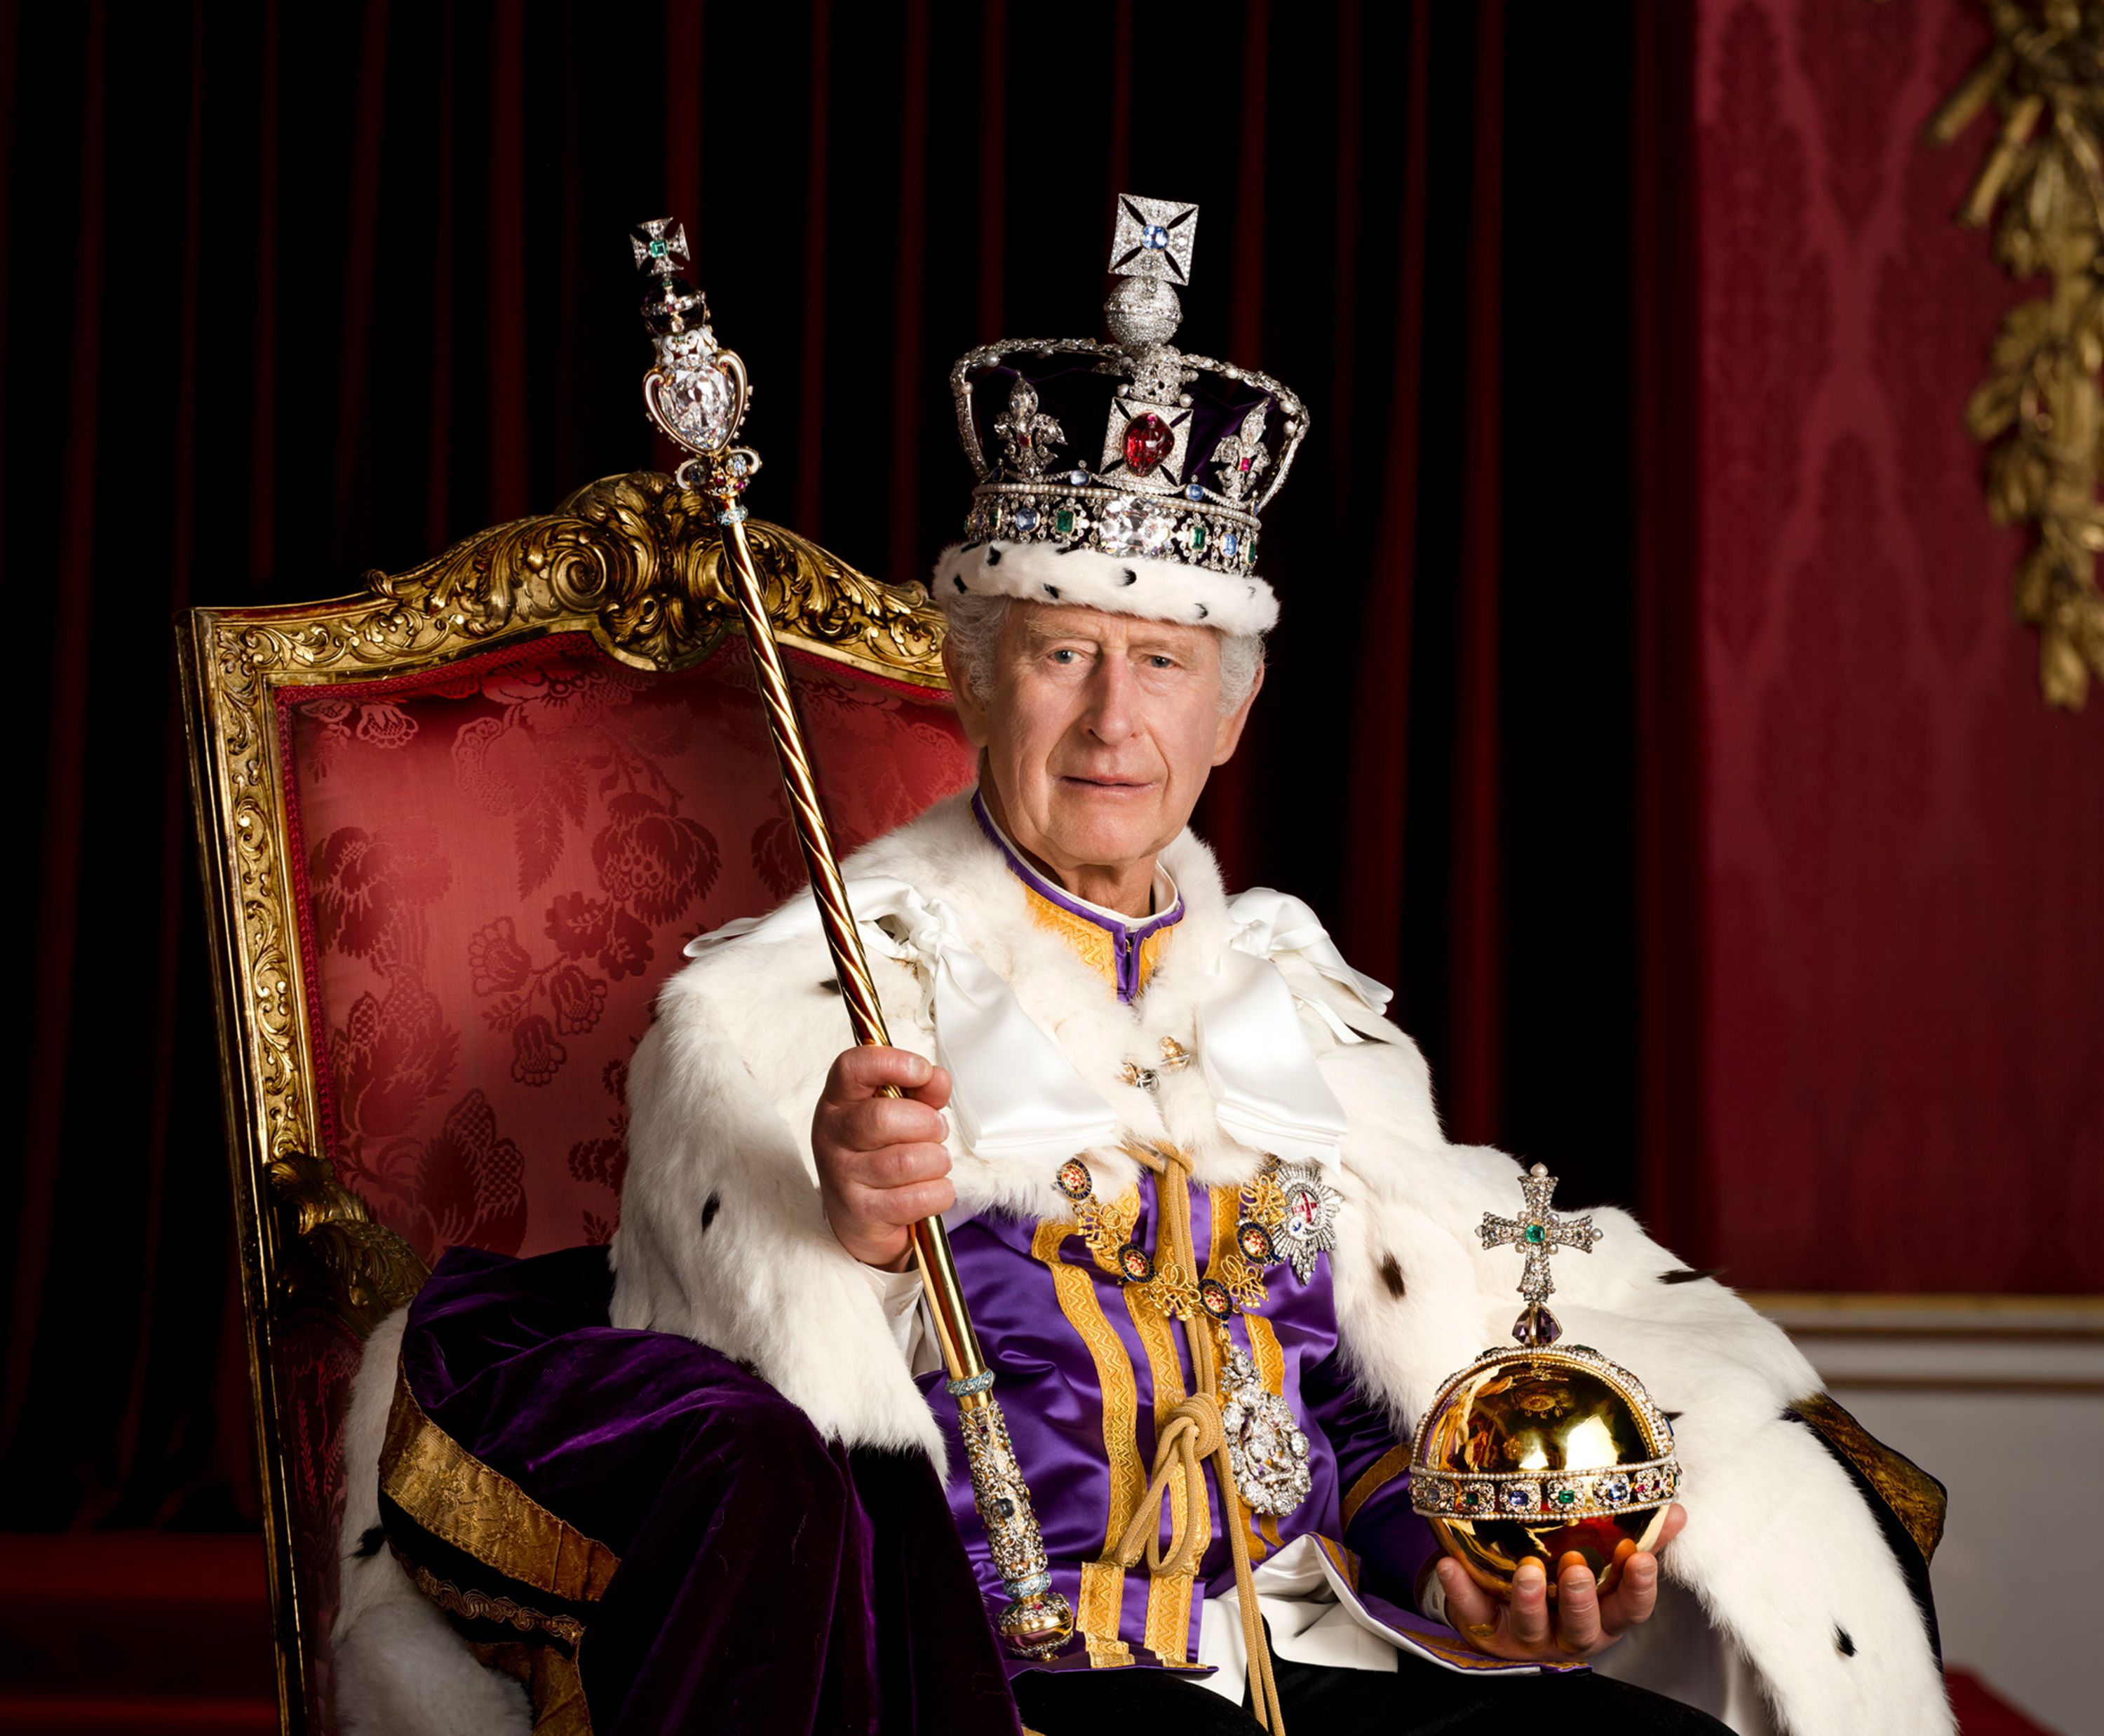 Britain's King Charles III <a href="https://www.cnn.com/2023/05/08/uk/coronation-official-portraits-intl-gbr-ckc/index.html" target="_blank">poses for a portrait</a> in Buckingham Palace's Throne Room dressed in full regalia. He is wearing the Robe of Estate and the Imperial State Crown while holding the Sovereign's Orb and the Sovereign's Sceptre with Cross.